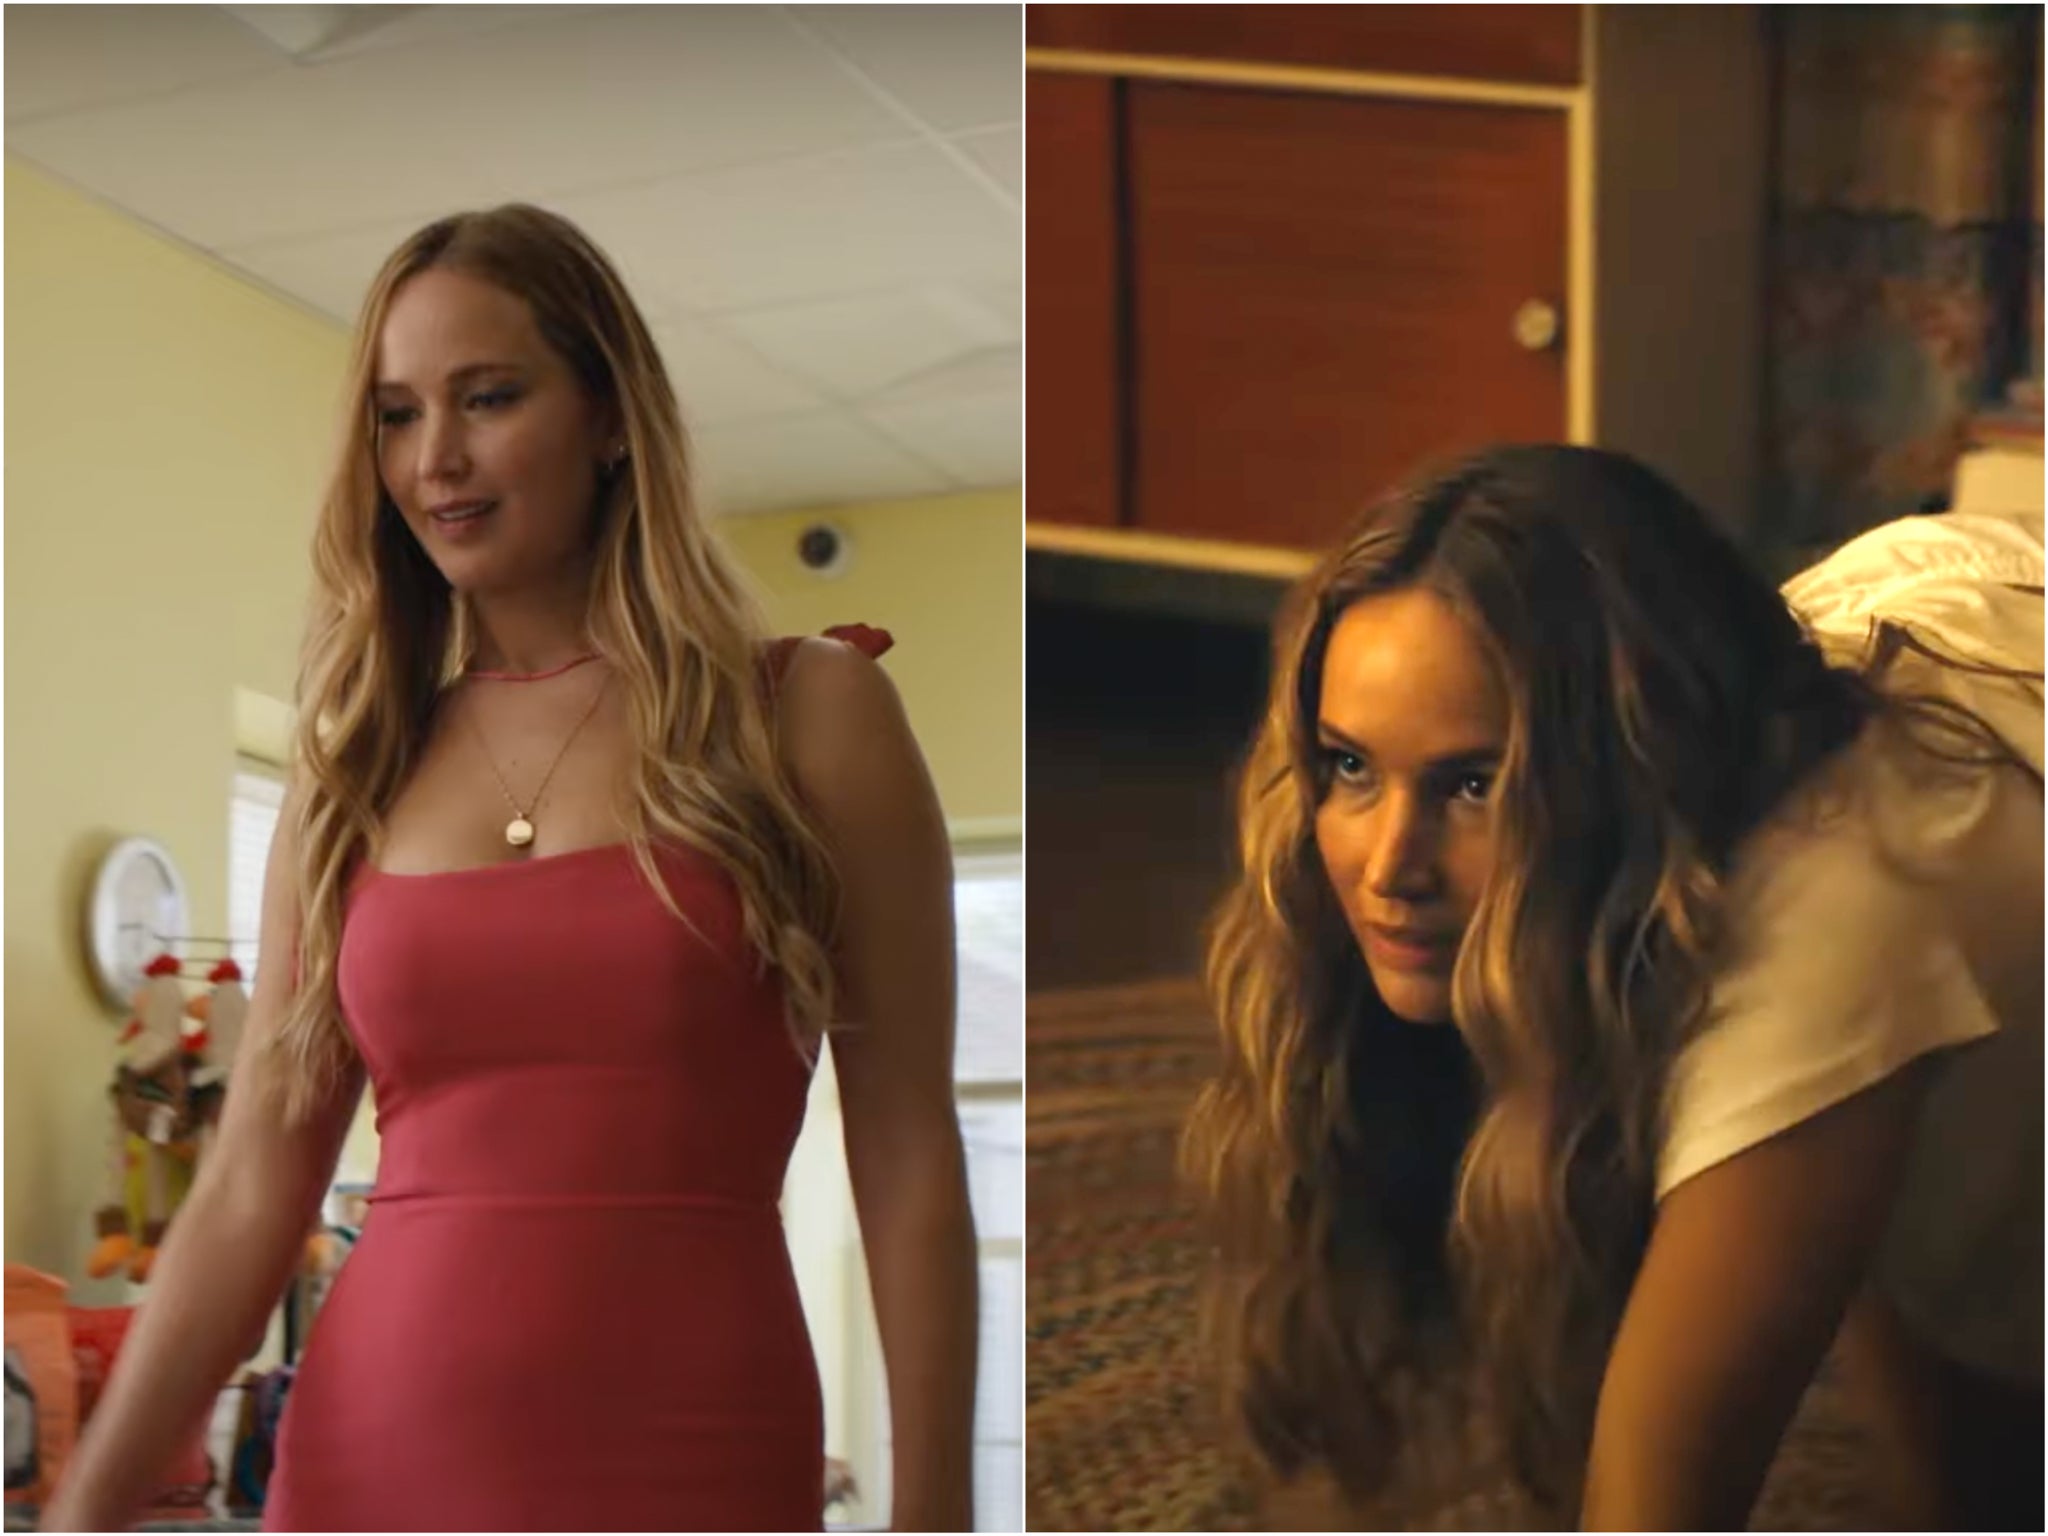 No Hard Feelings Jennifer Lawrence is hired to seduce a 19-year-old boy in new trailer The Independent pic